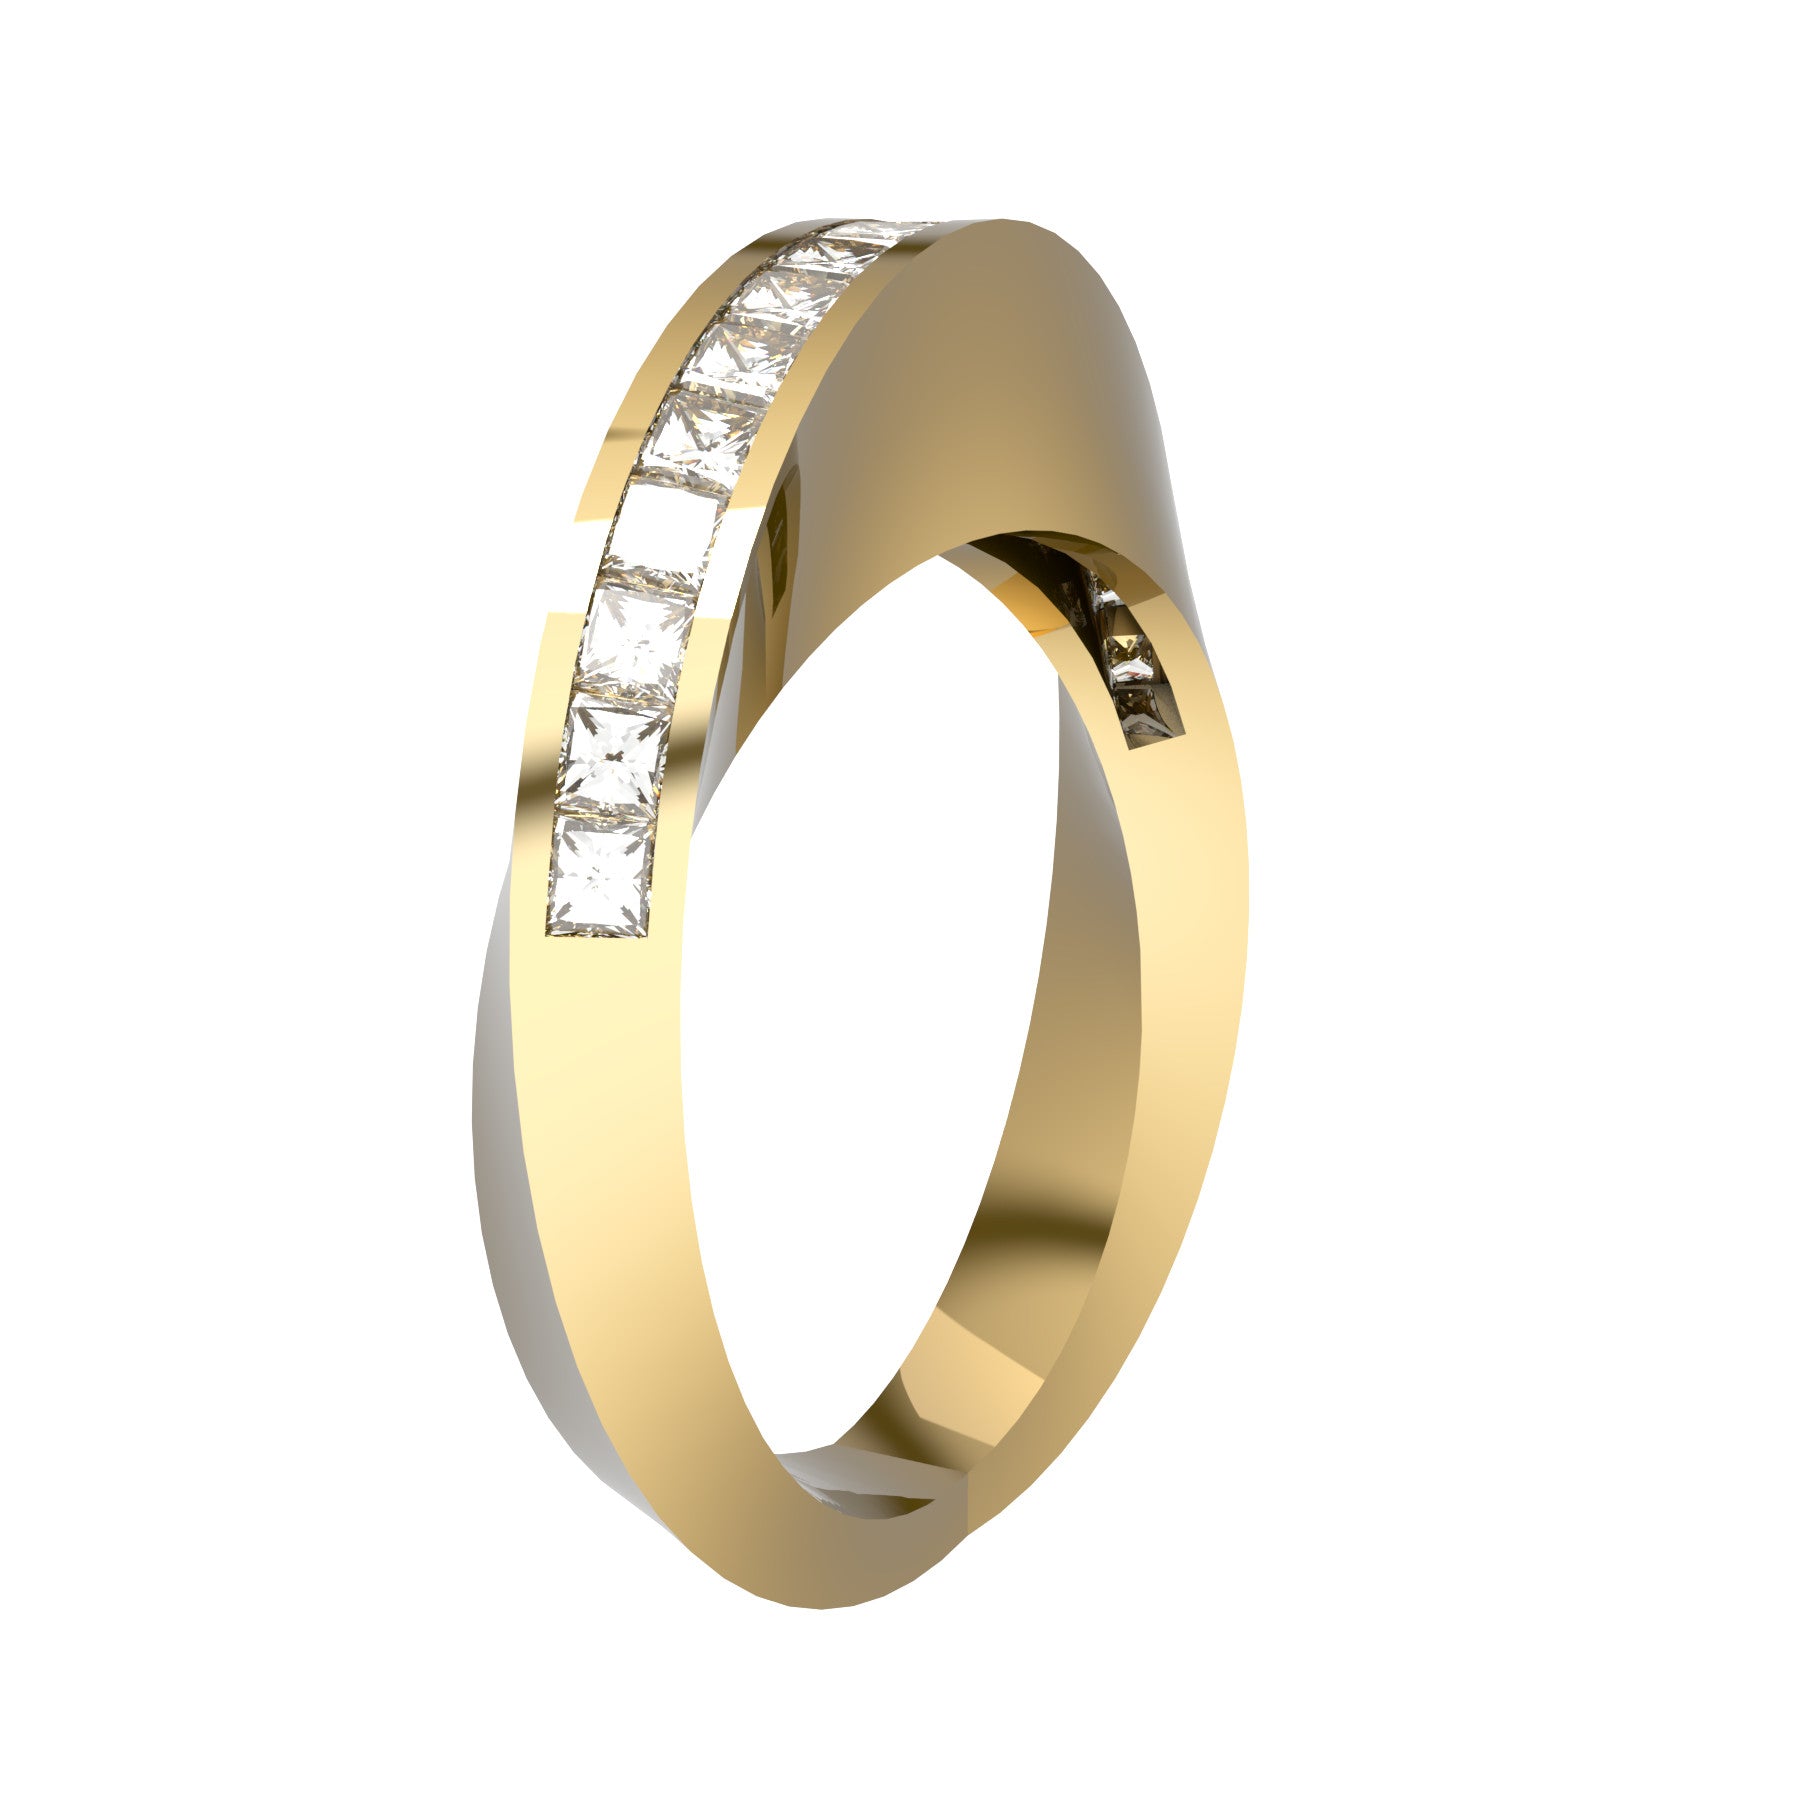 crazy ribbon ring, 18 K yellow gold, 18 square natural diamonds, about 0,90 ct, weight about 8,5 g (0.30 oz) width 3 mm